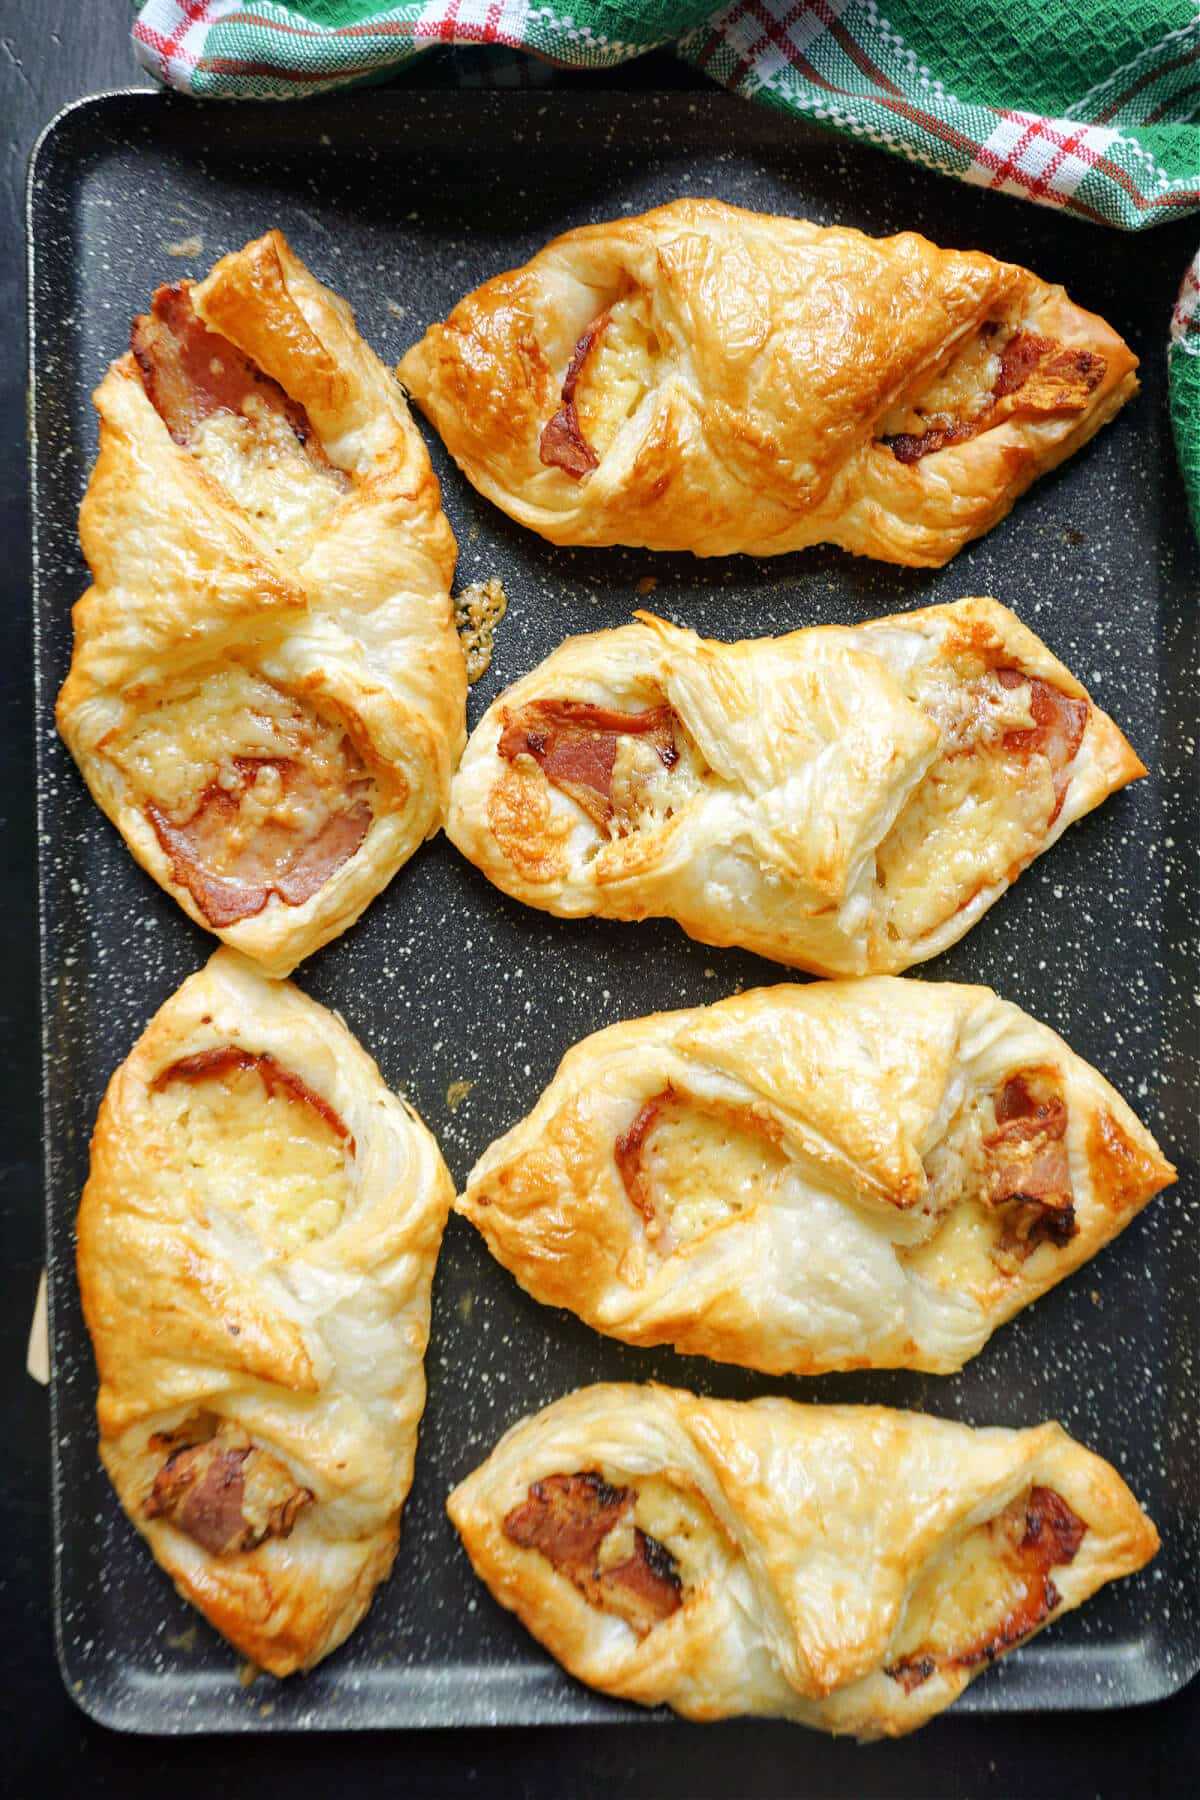 A baking tray with 6 bacon and cheese turnovers.